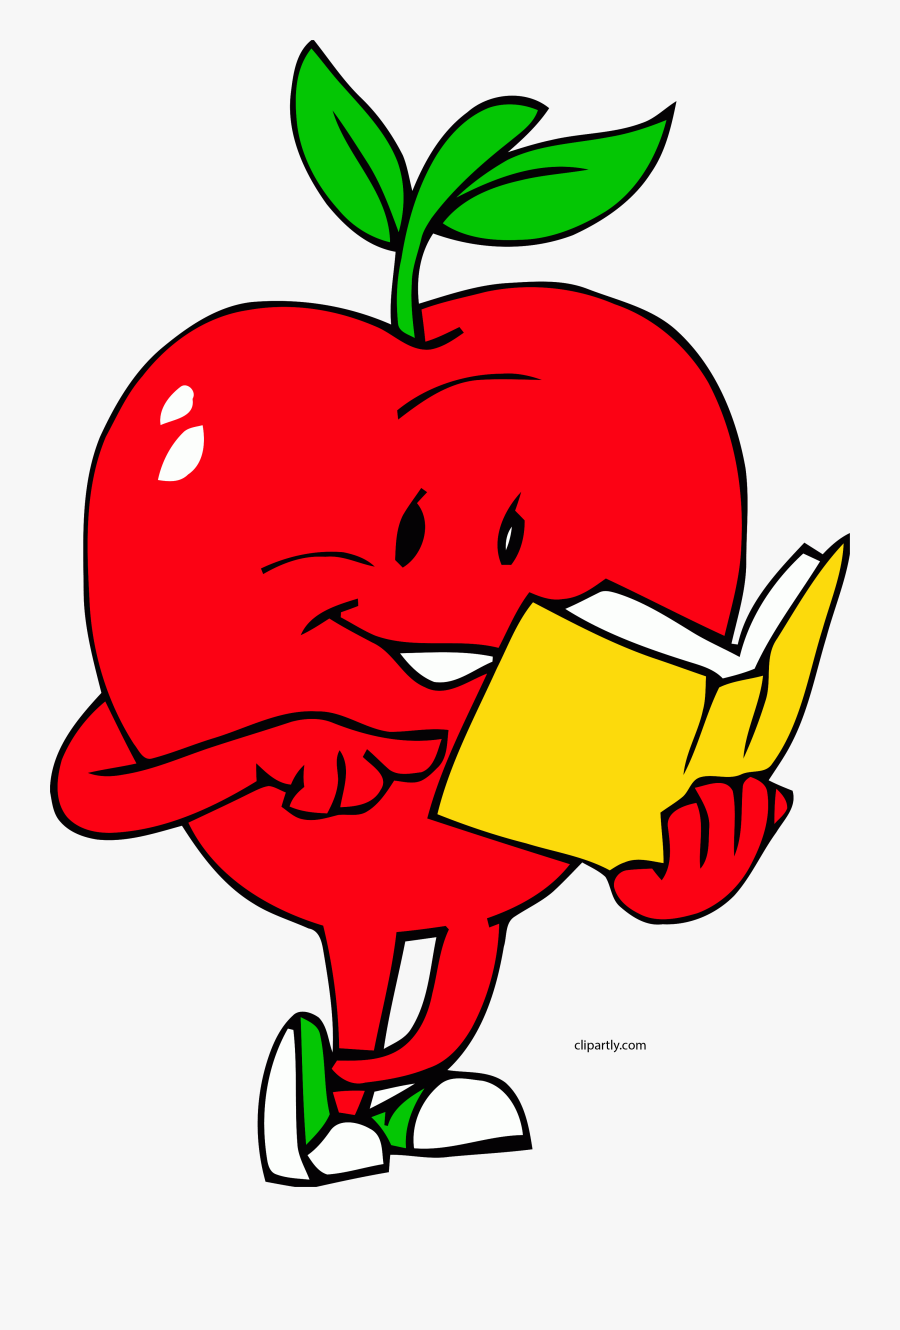 Book Clipart Apple - Role Of Educational Institutions In Inculcating Values, Transparent Clipart